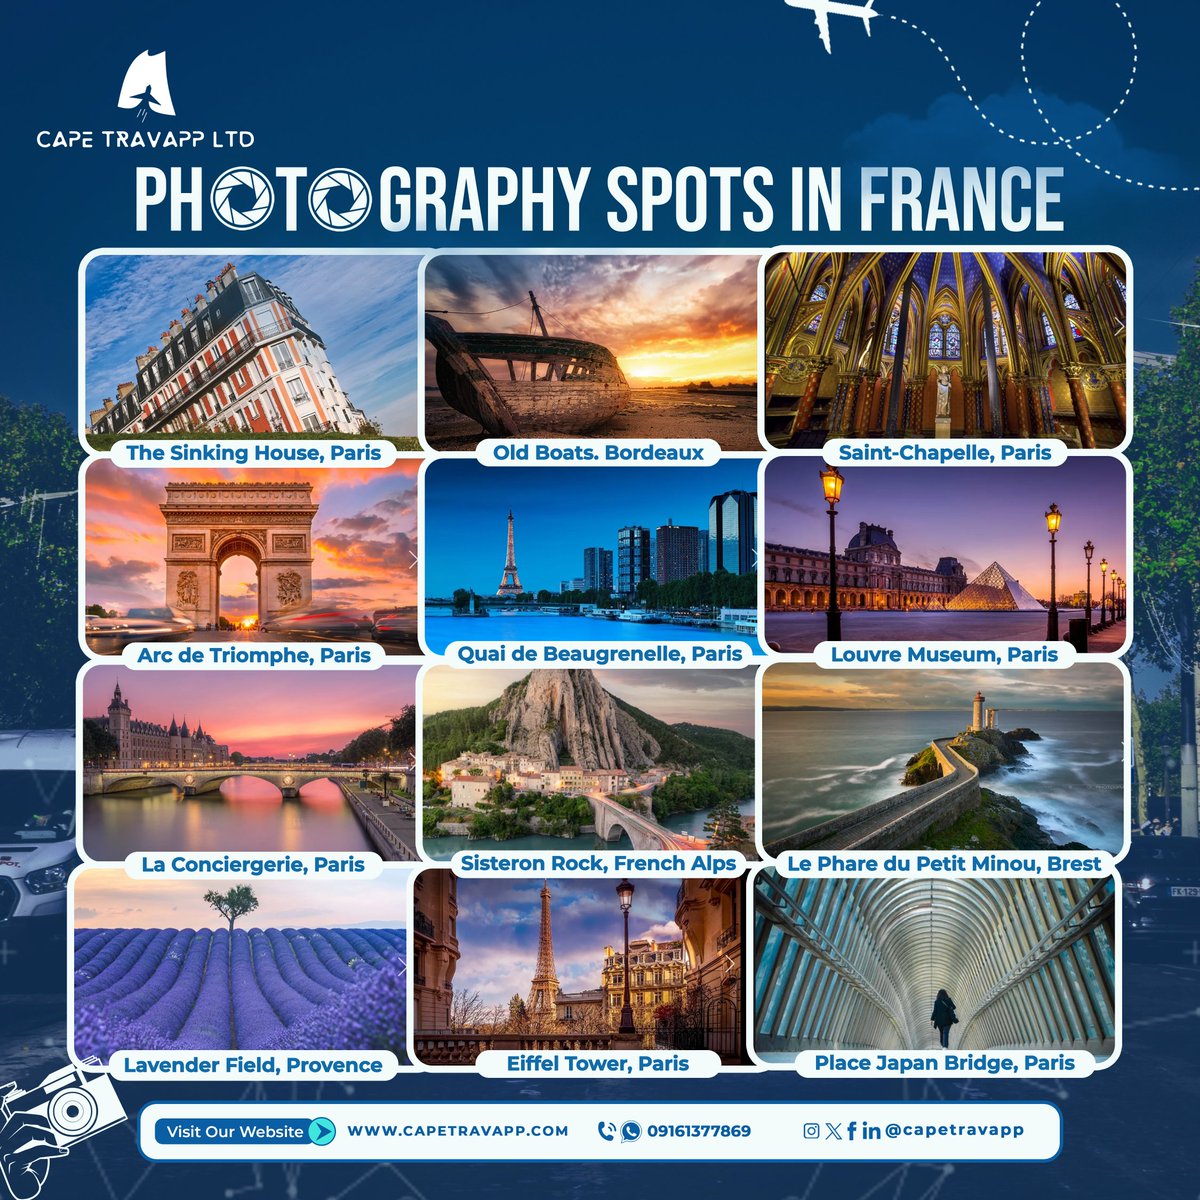 Discover the timeless beauty of France through the lens: capturing iconic landscapes, historic architecture, and the enchanting spirit of this picturesque country.🇫🇷🗼📸🤳

#photography #travelgoals #explorefrance #francetravels #paris #louvre #capetravels #capetravapp #packages